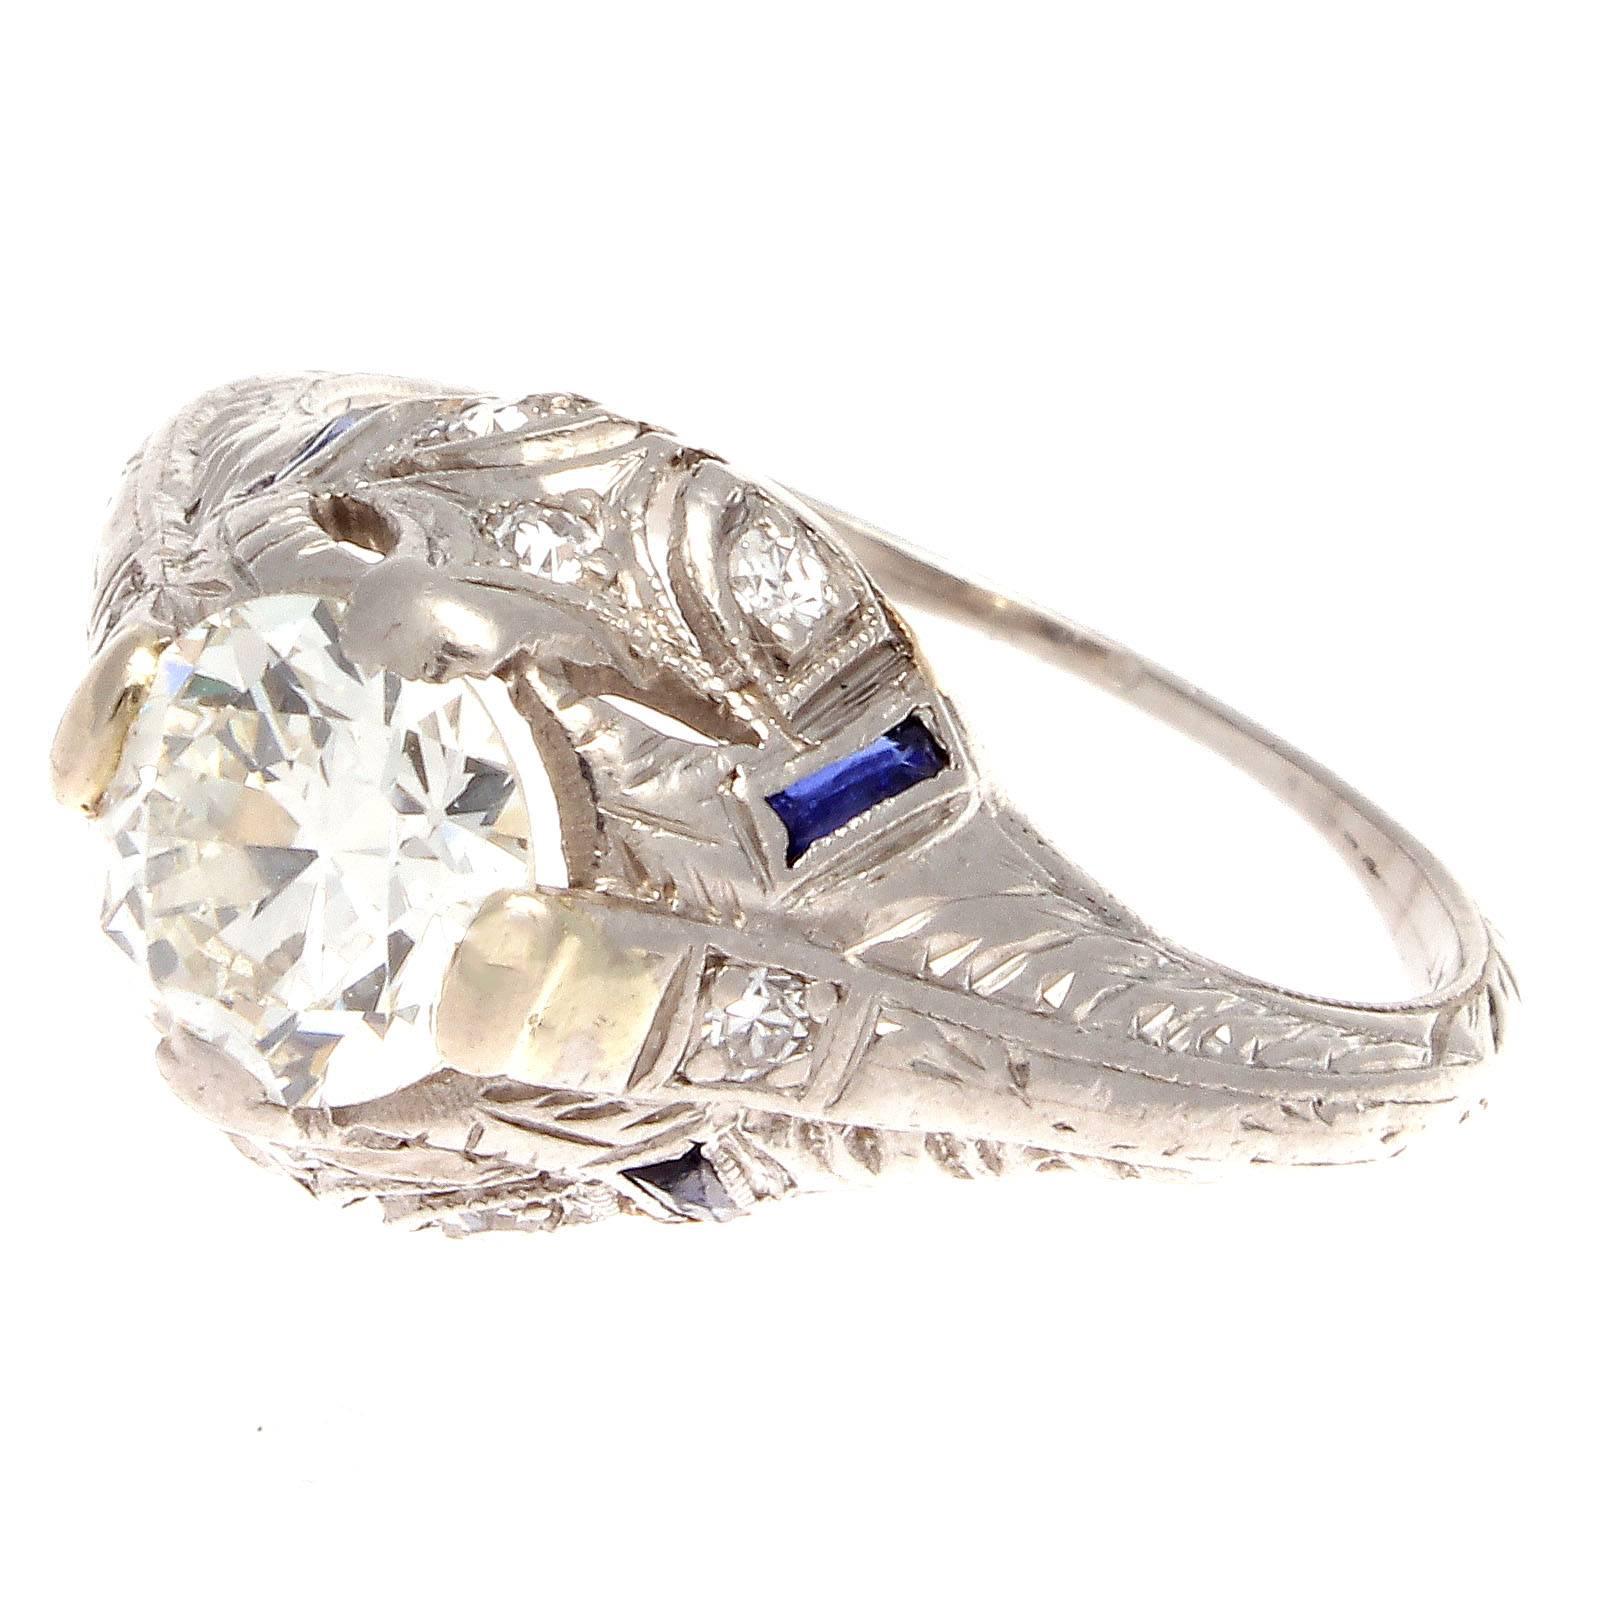 The architectural design and attention to detail makes this engagement ring undeniably Art Deco. Featuring a 0.75 carat old European cut diamond that is I color, VS+ clarity. Perfectly complimented by well placed blue sapphires and excellently